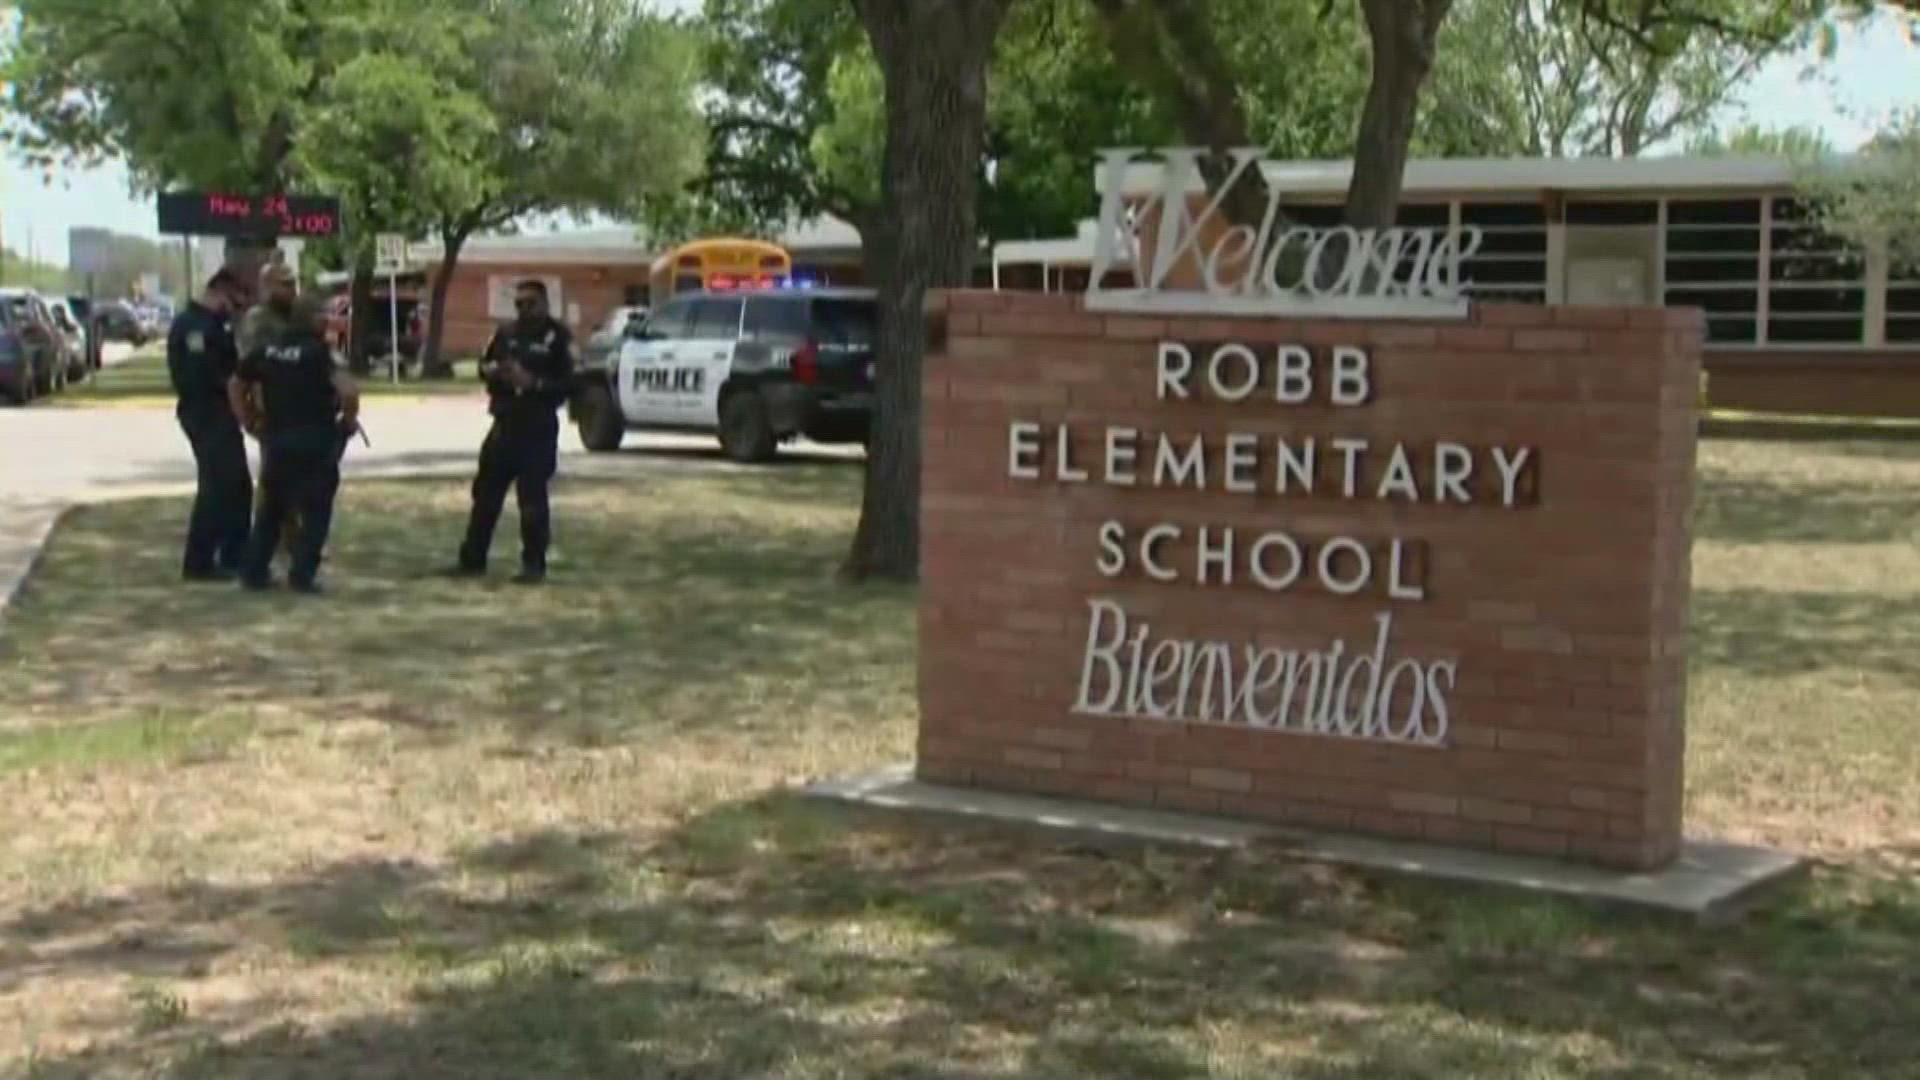 Many school districts are reviewing school safety measures after the Uvalde school shooting Tuesday.